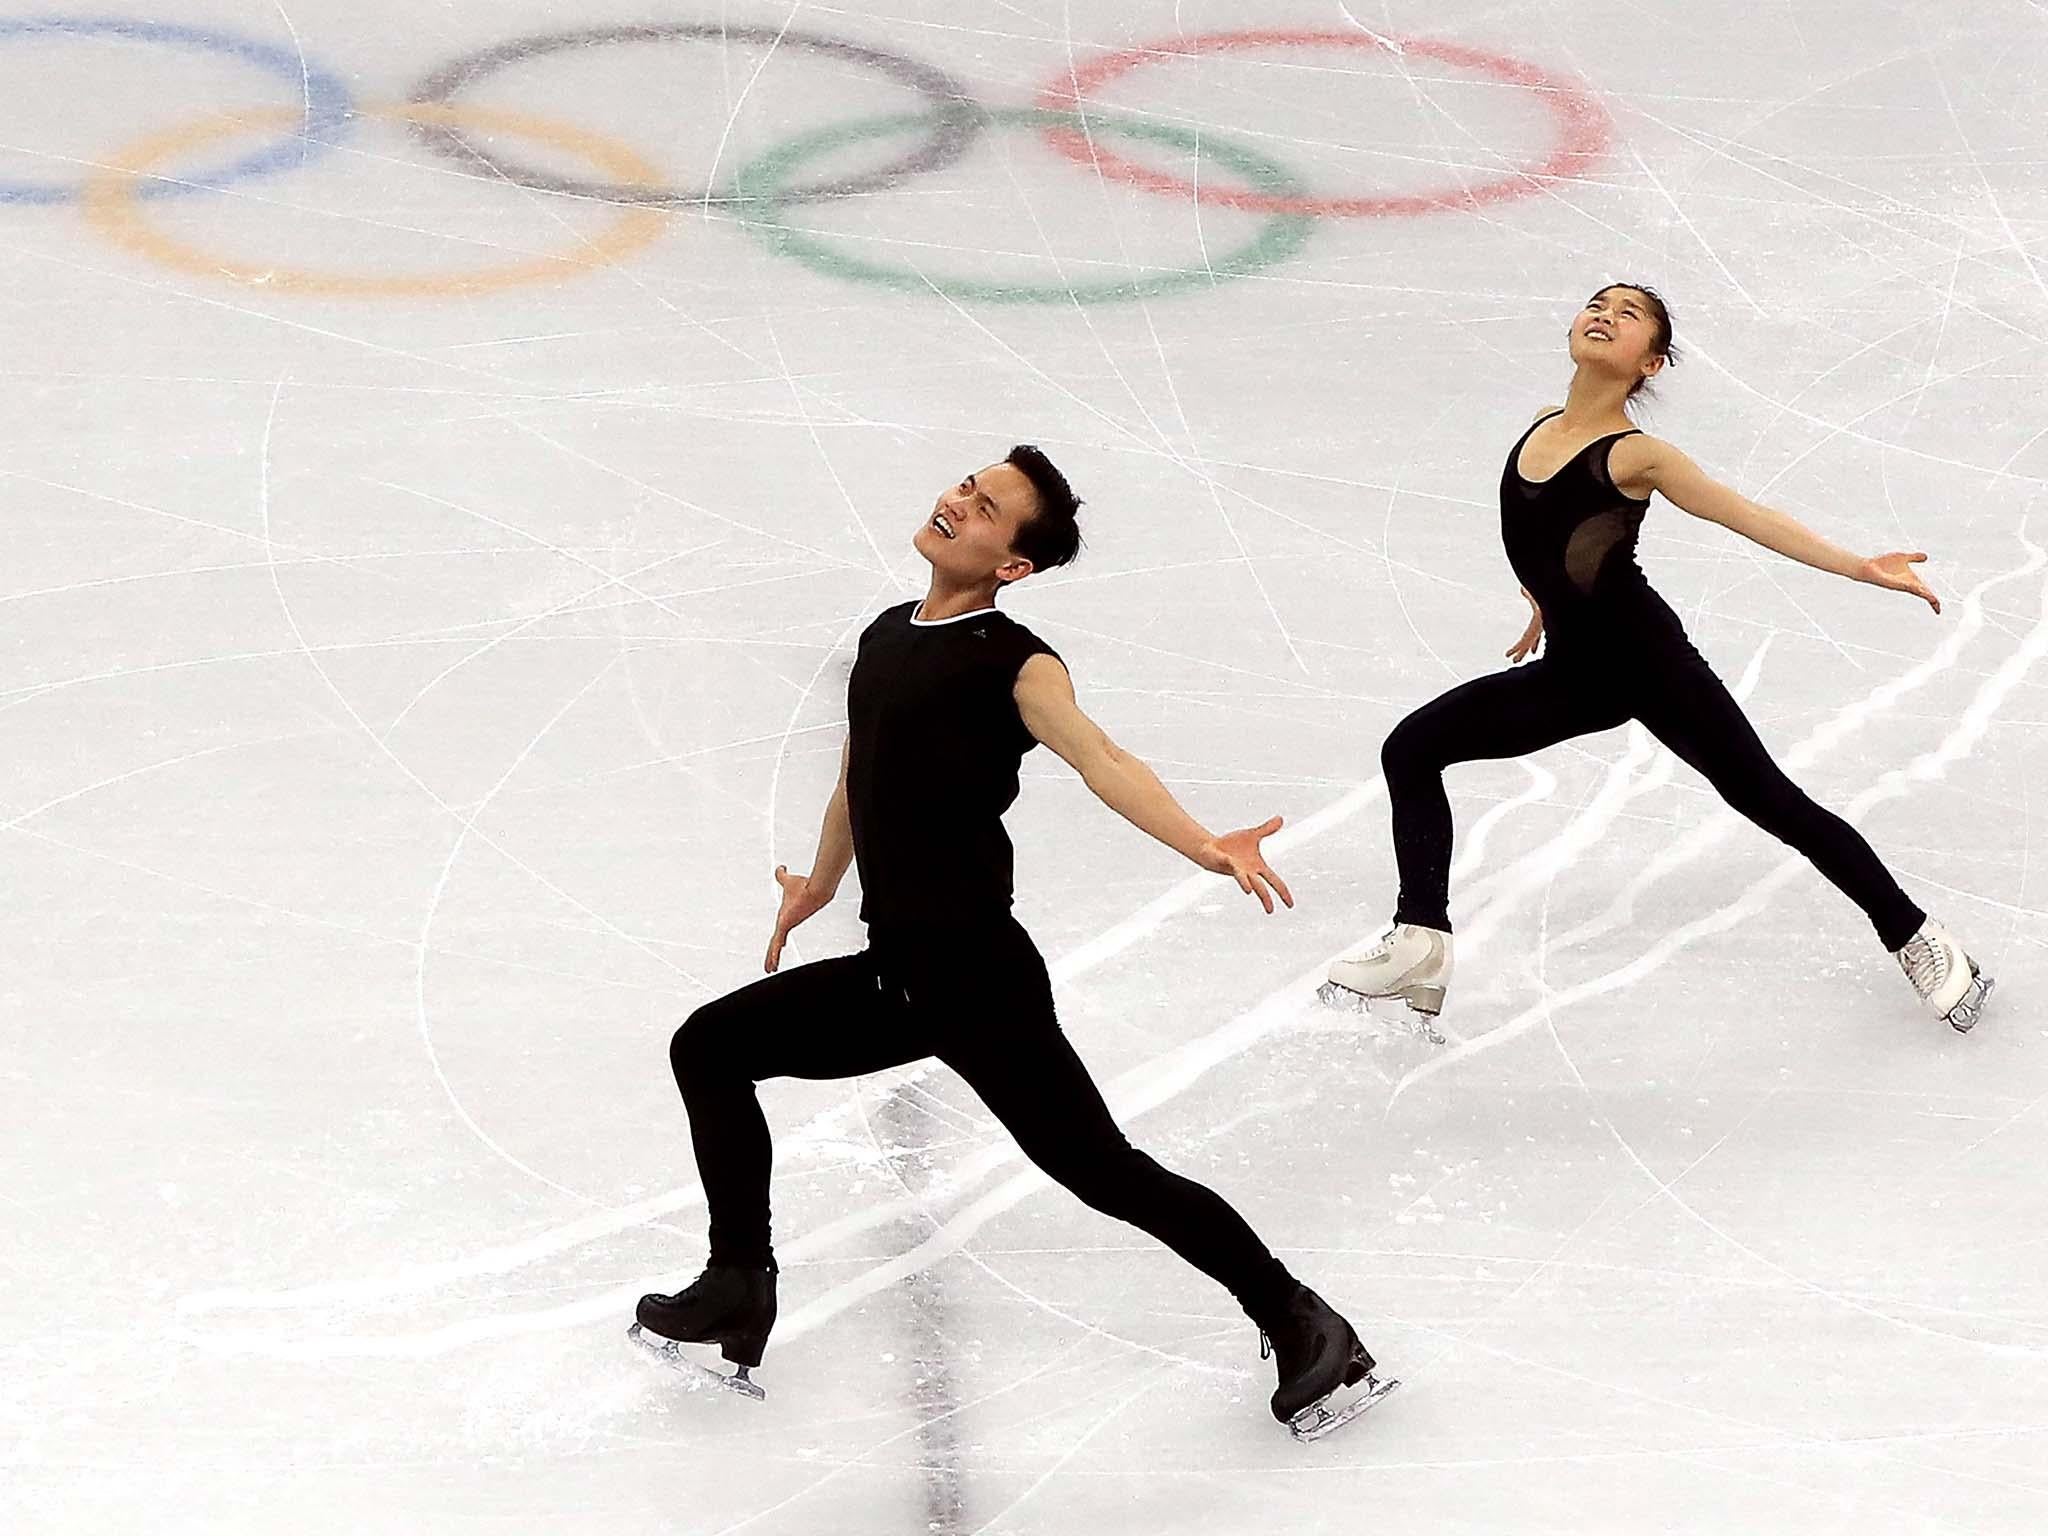 North Korean figure skaters practice in South Korea ahead of the Winter Olympics